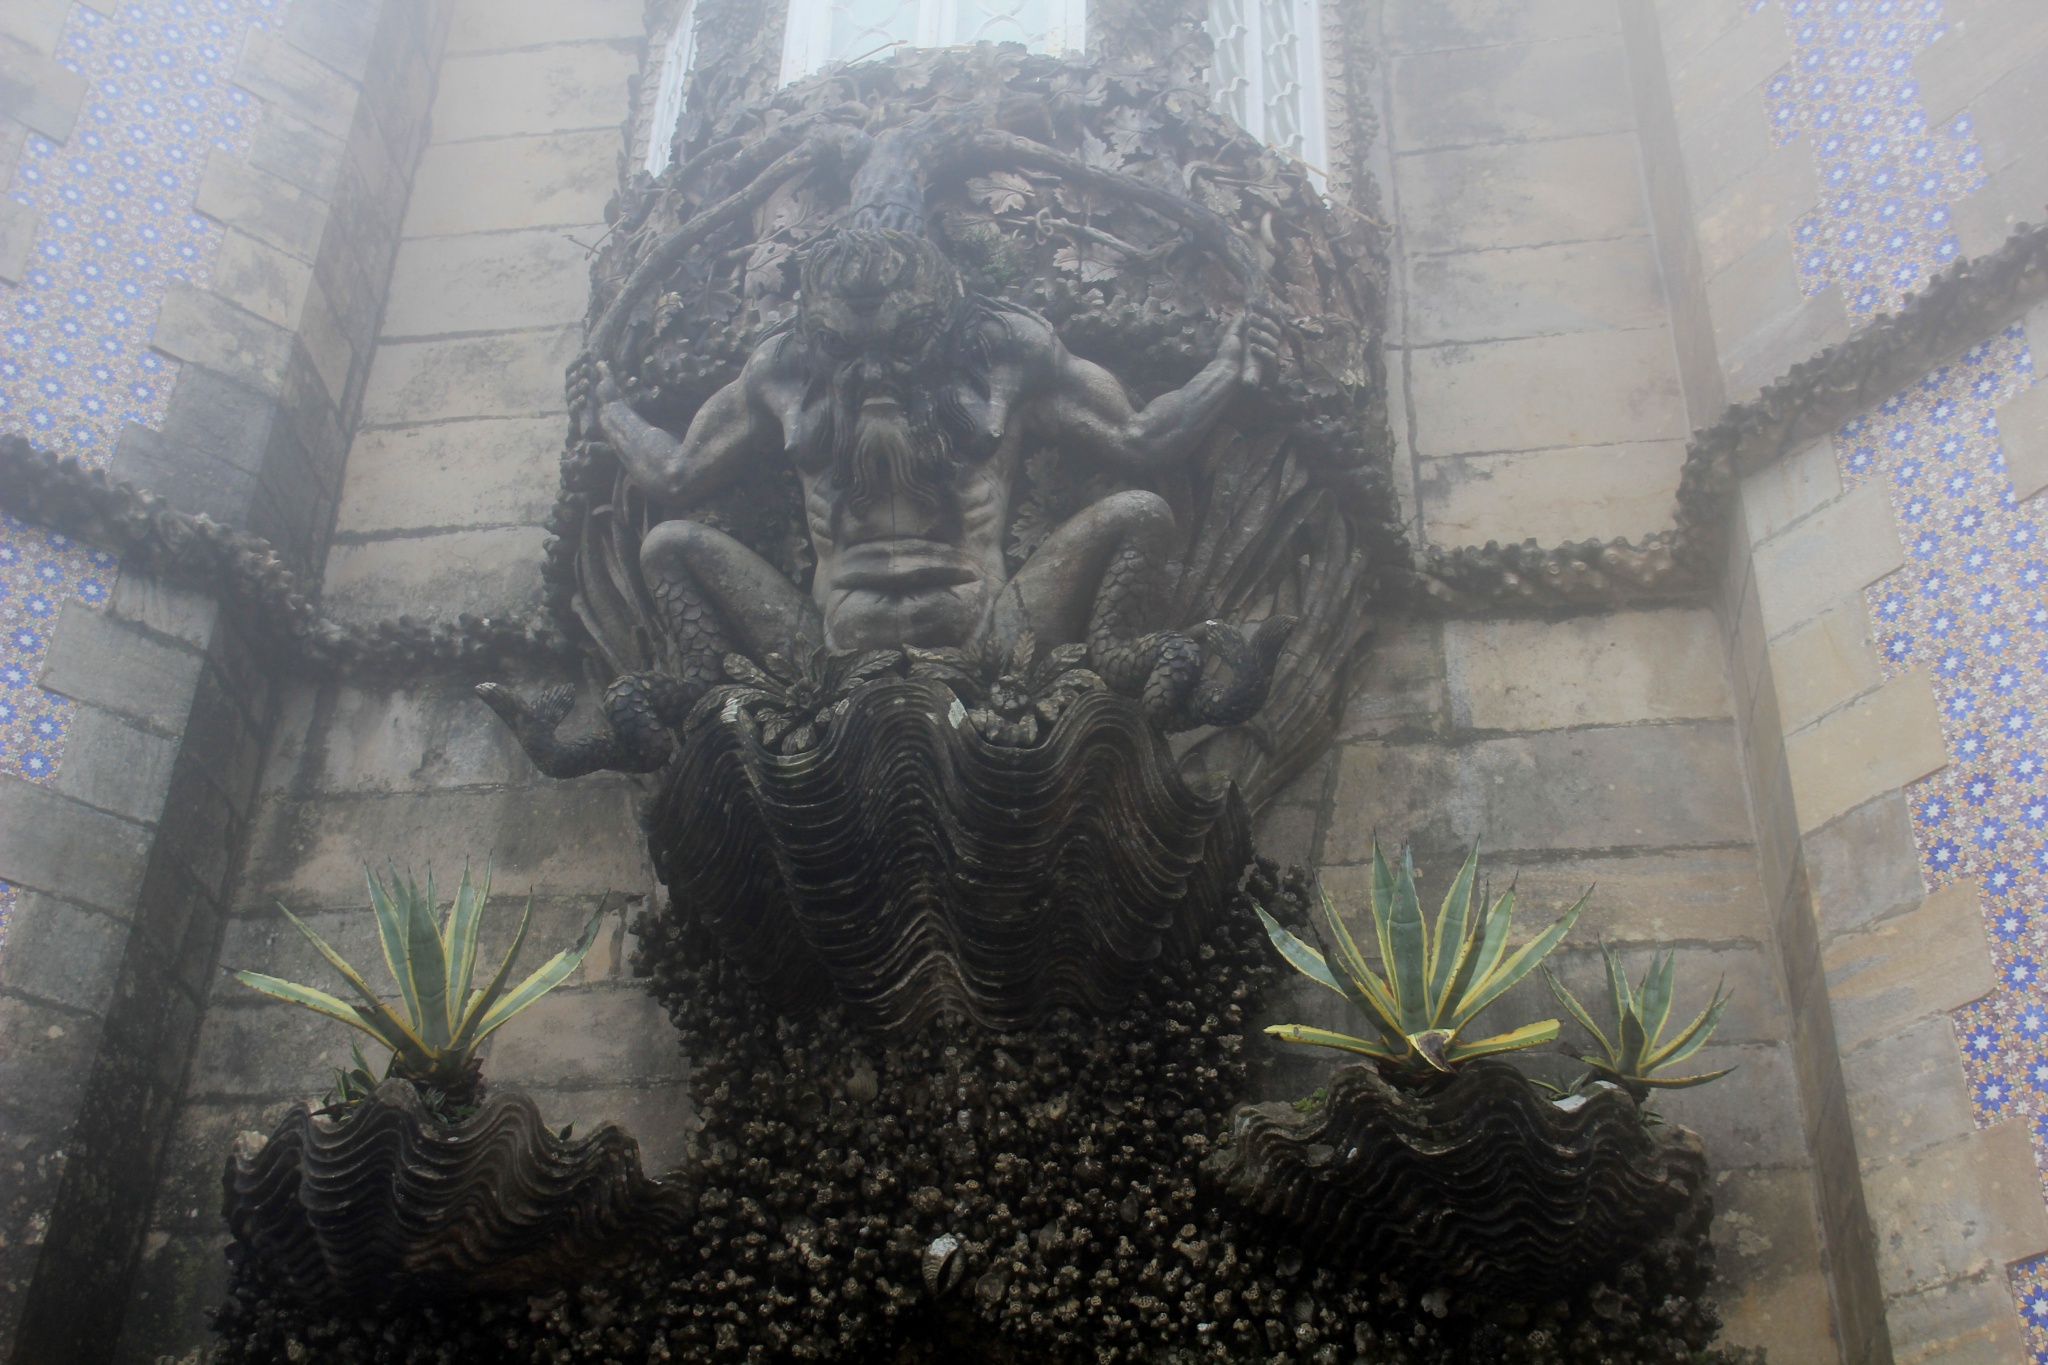 A triton emerges from a clamshell above a gate in the Pena National Palace in Sintra, Portugal.